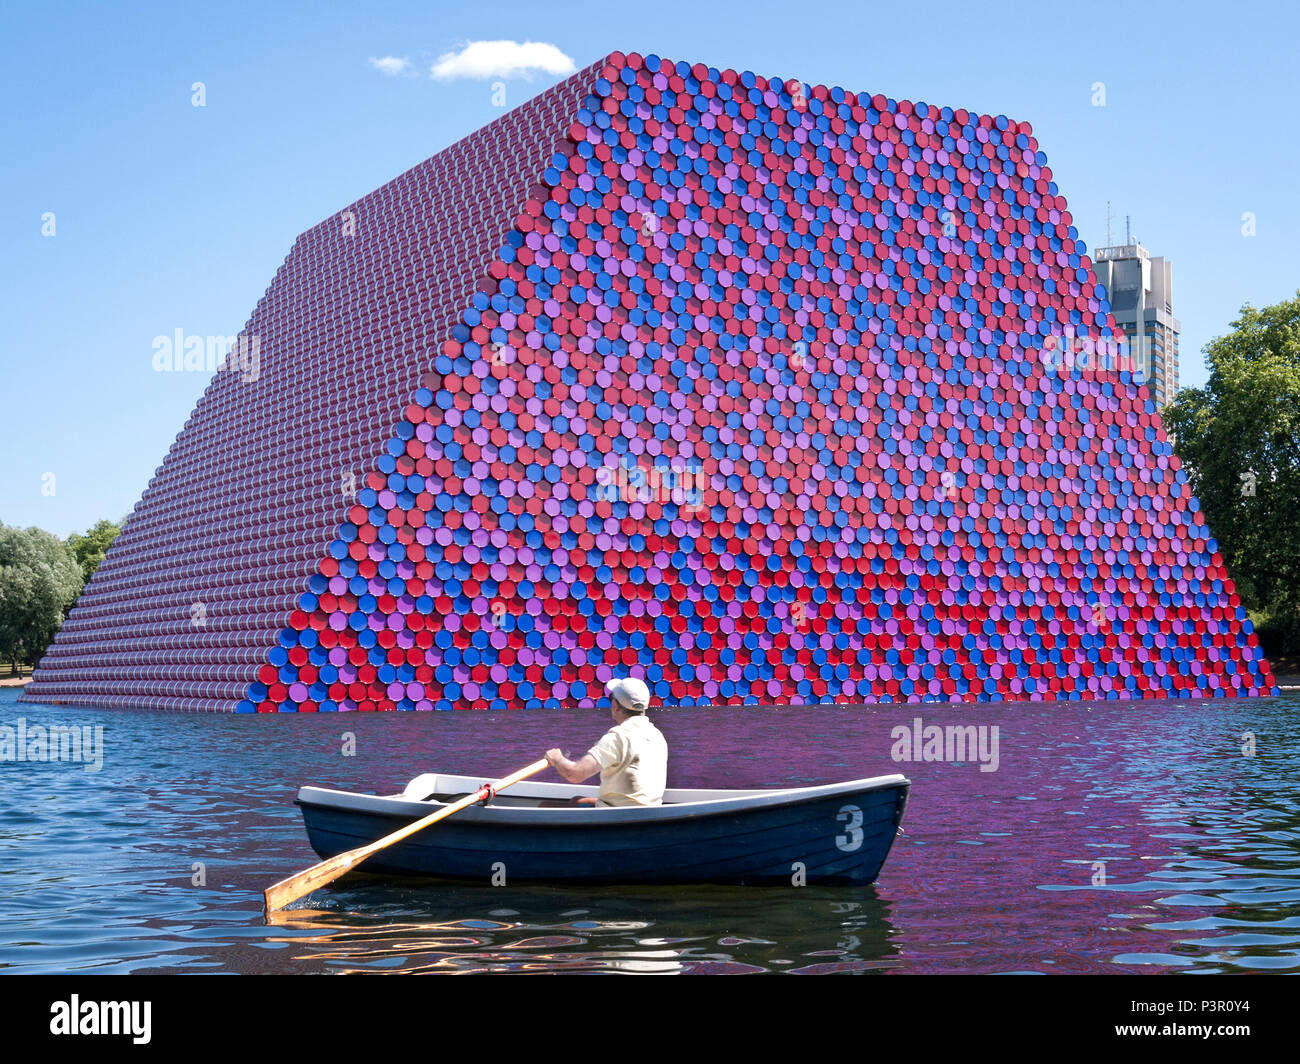 The Mastaba sculpture by Christo and Jeanne Claude in the Serpentine lake Hyde Park london UK Stock Photo